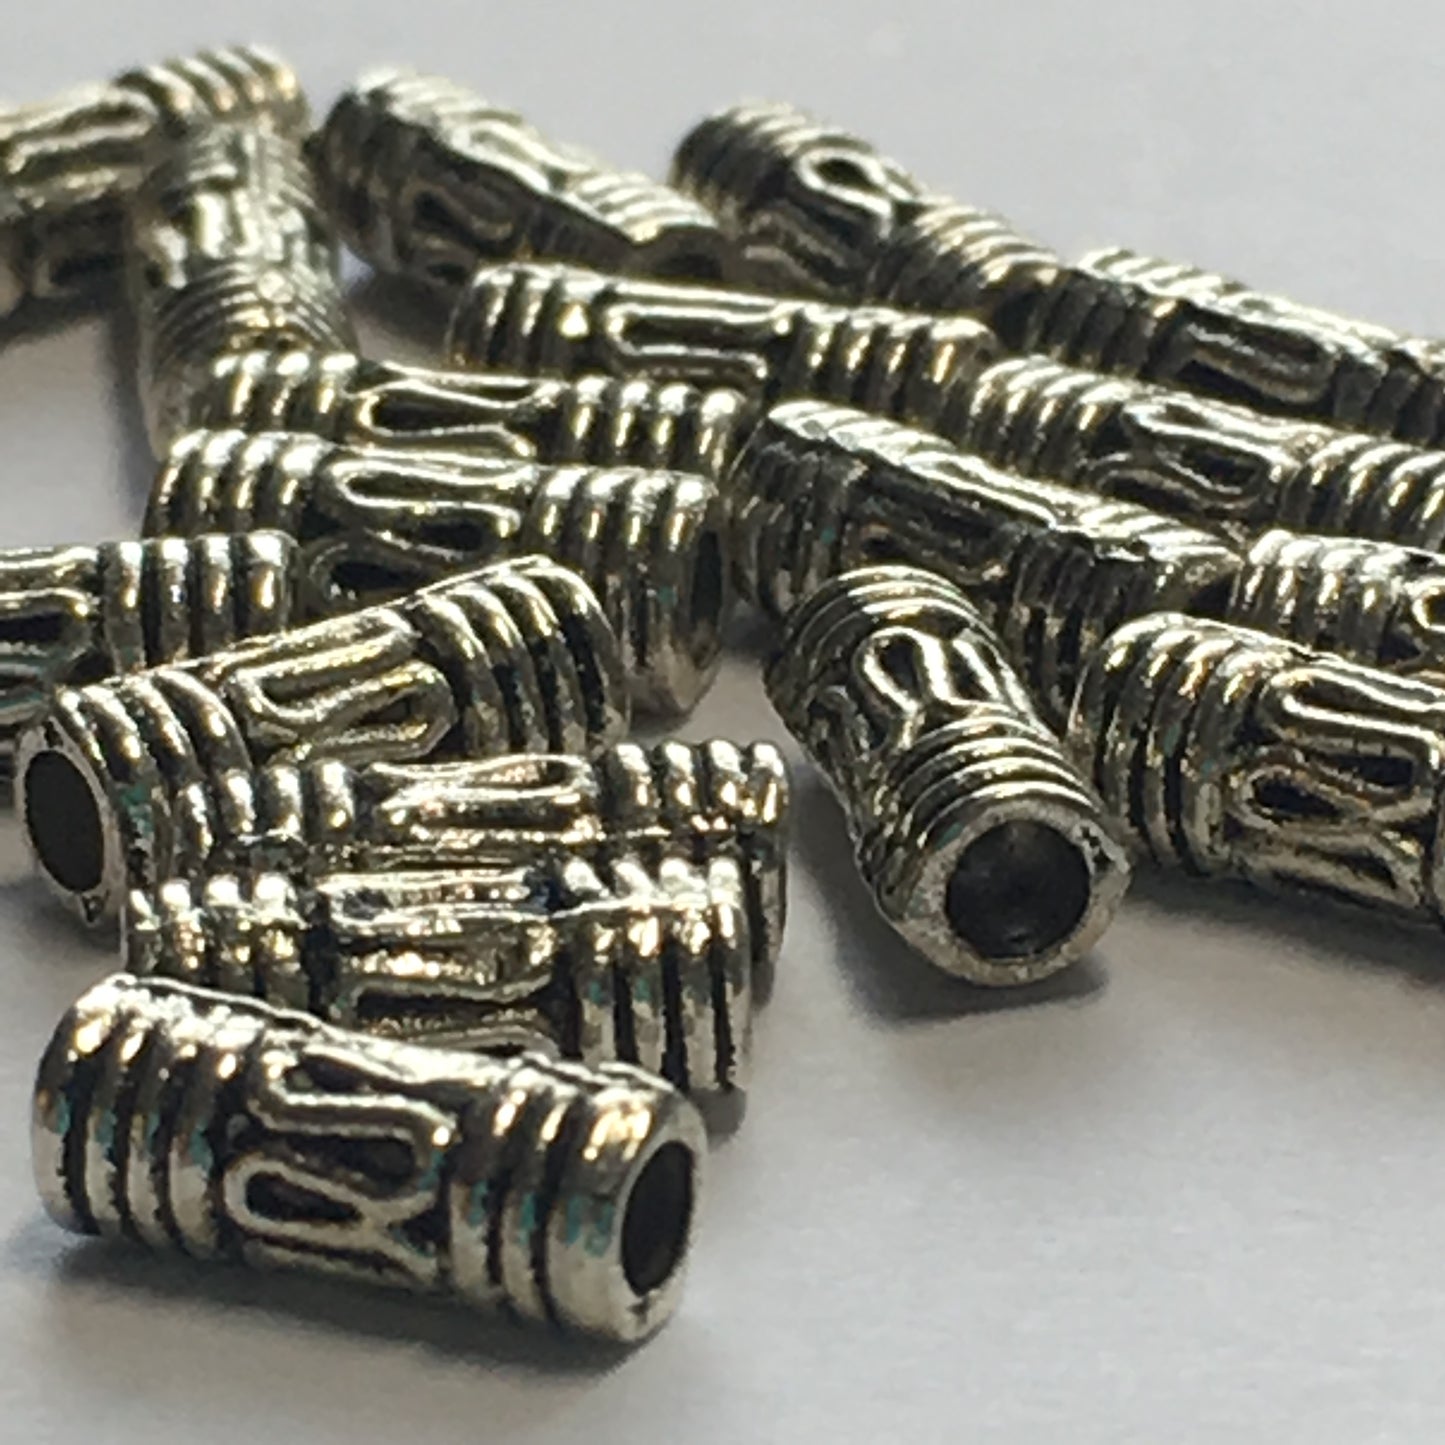 Antique Silver Bali Style Tube Beads, 8 x 3 mm , 18 Beads